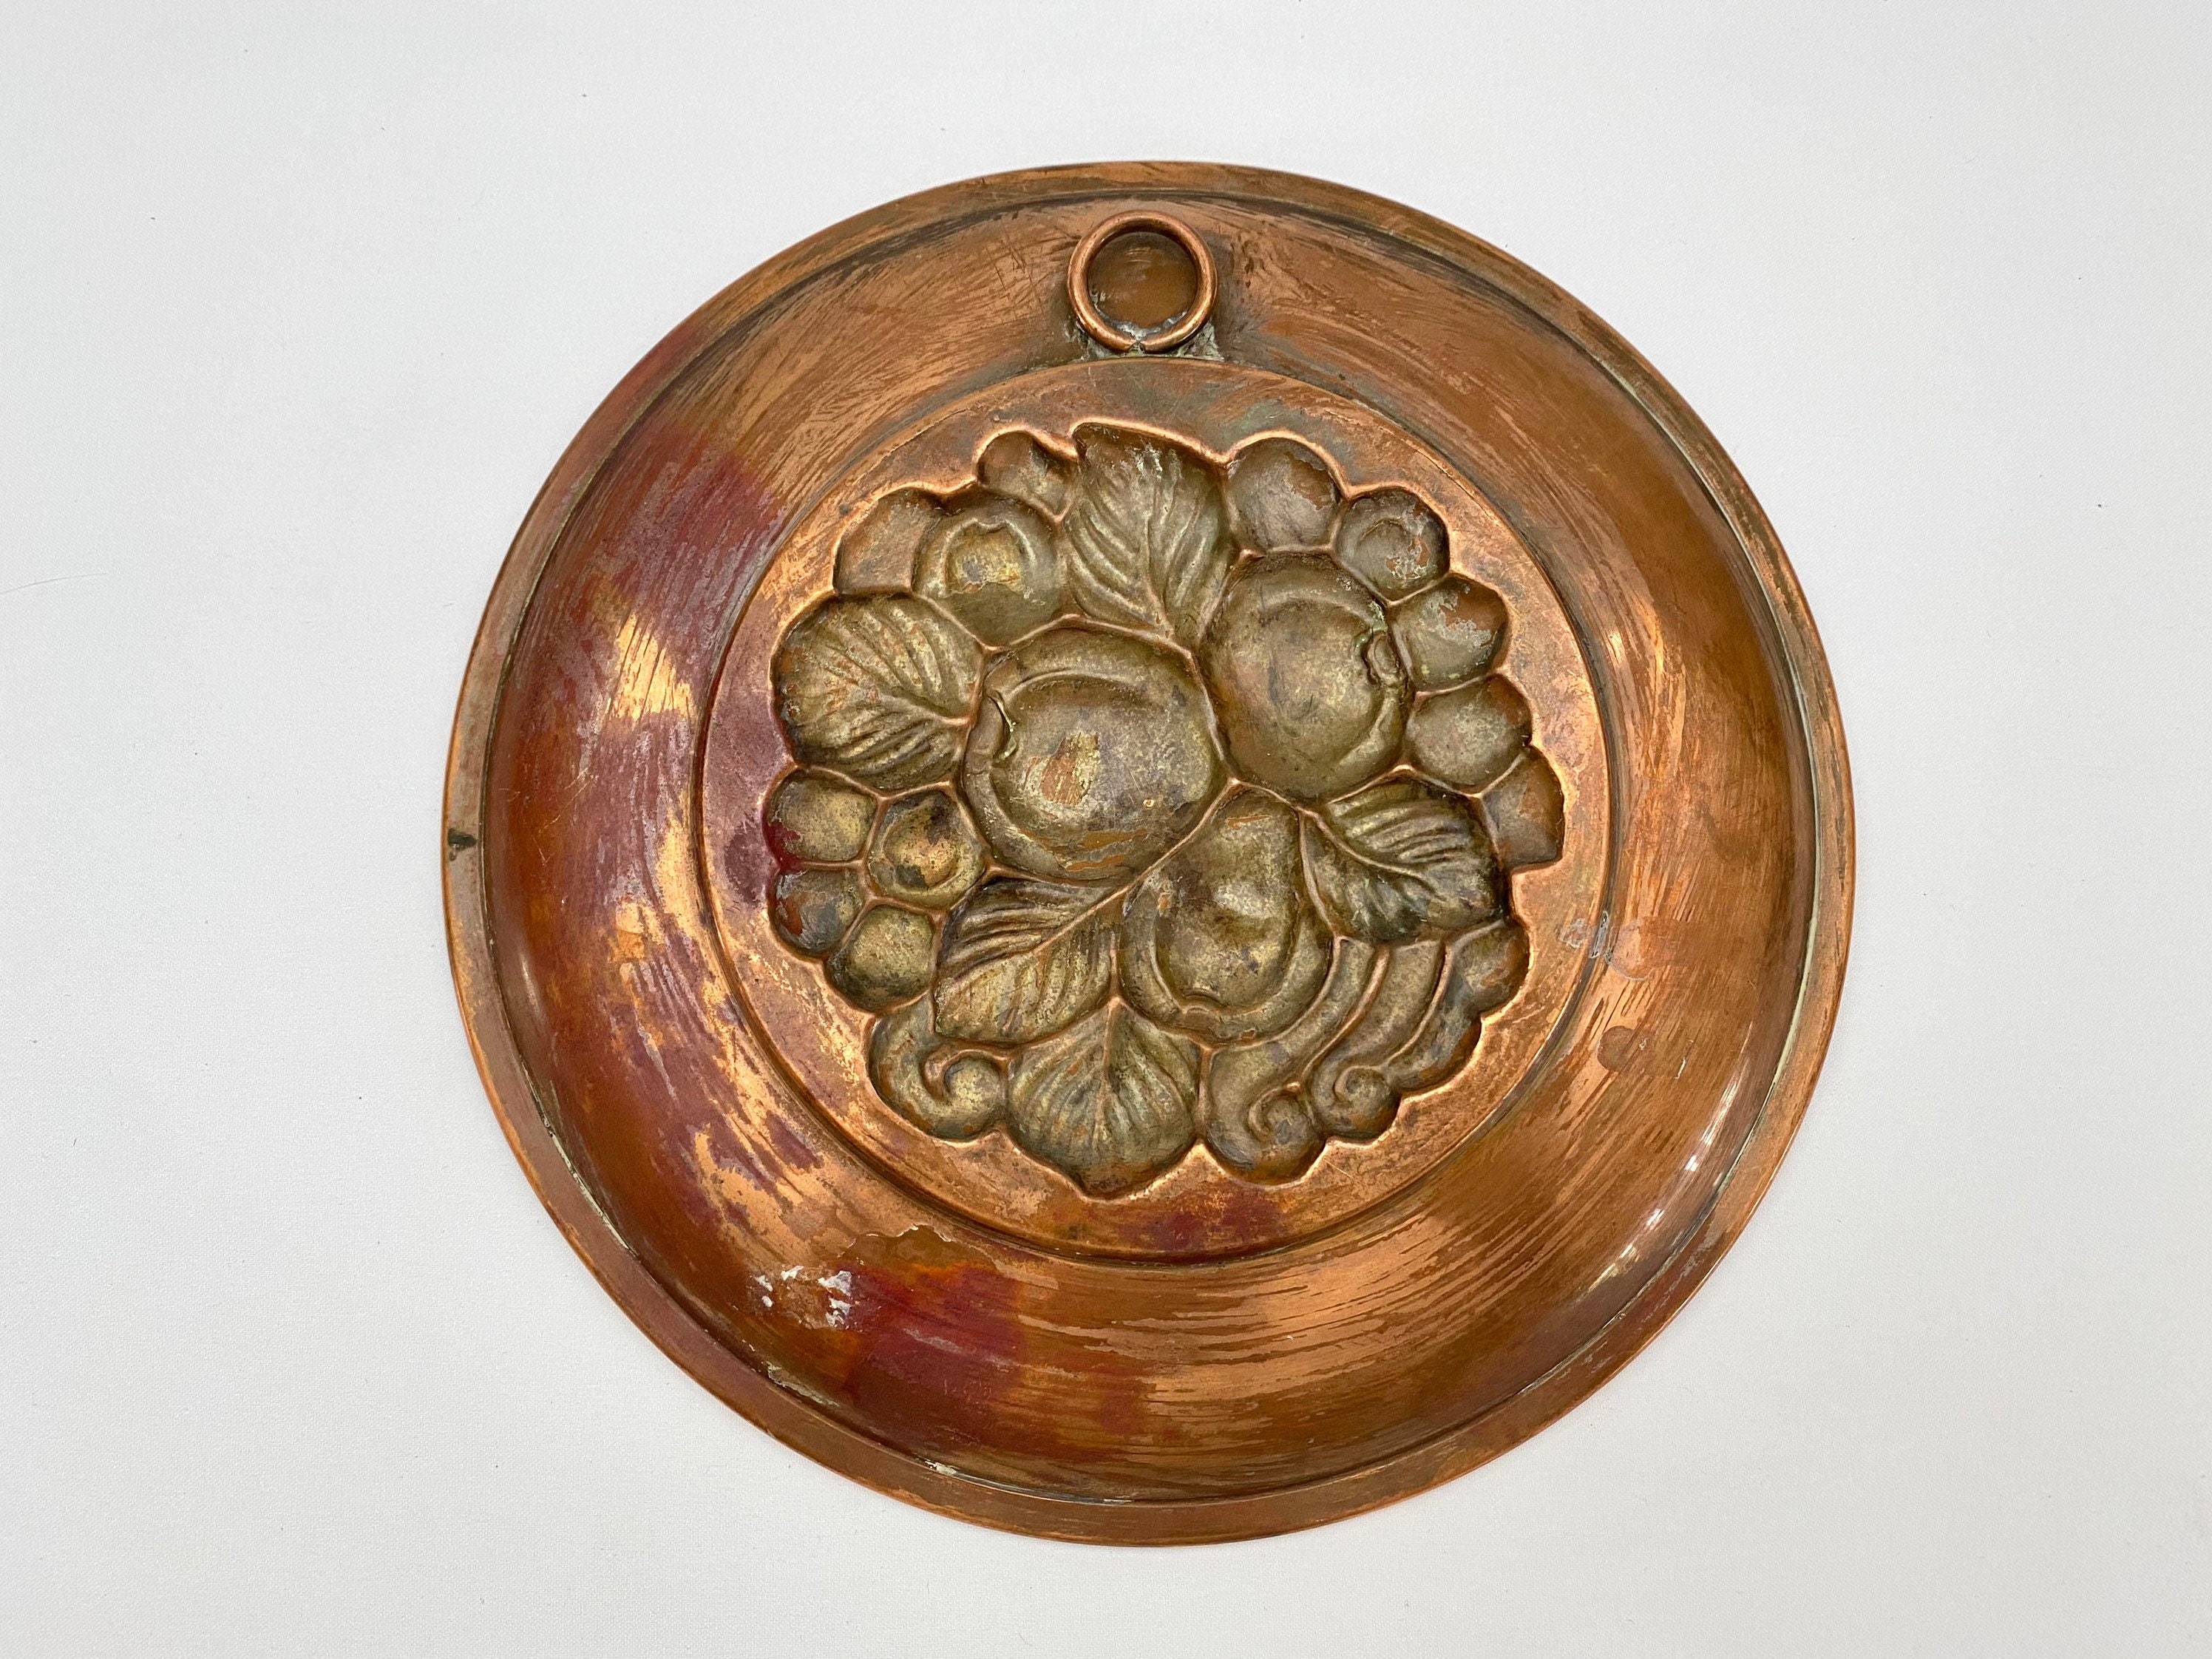 HAND MADE ORNATE FLORAL COPPER WALL DECOR PLATE WITH BOX UZBEK MINIATURE 7' INCH 